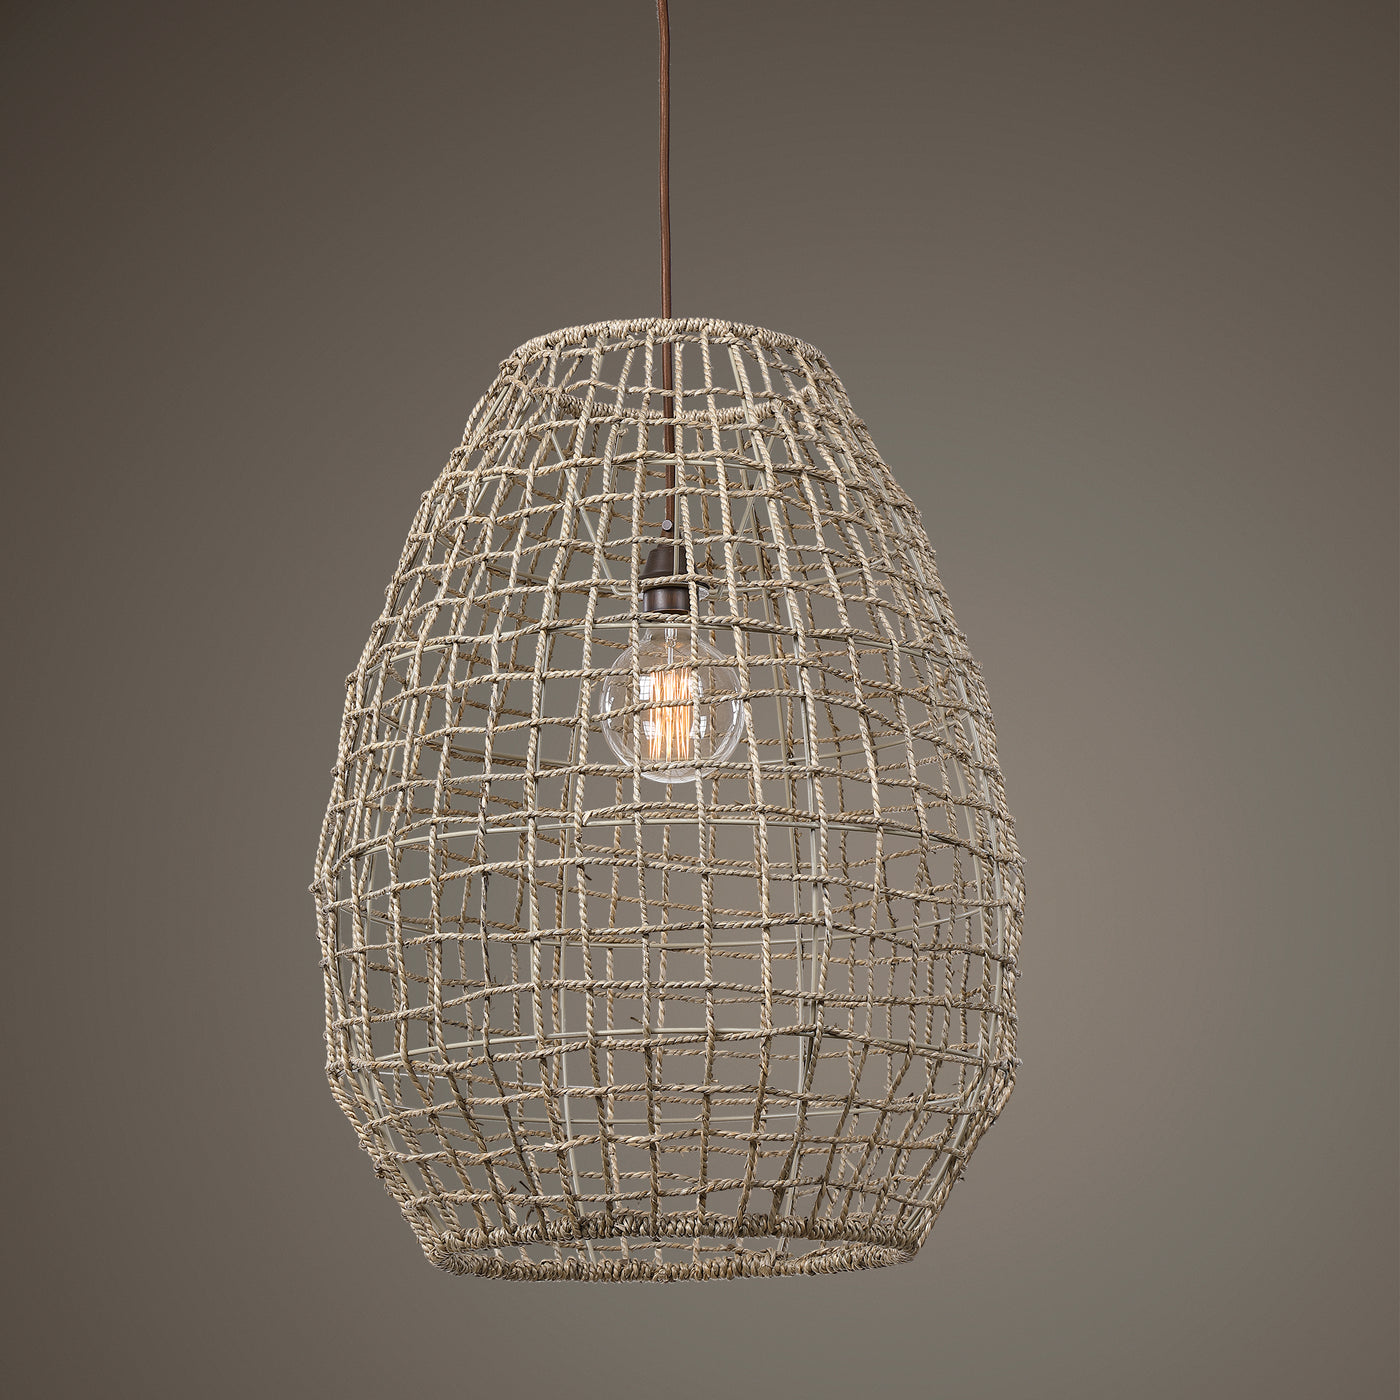 Natural Woven Seagrass In A Cross-weave Pattern Gives Us This Wonderful Airy 1 Lt. Pendant With Brushed Aged Bronze Detail...